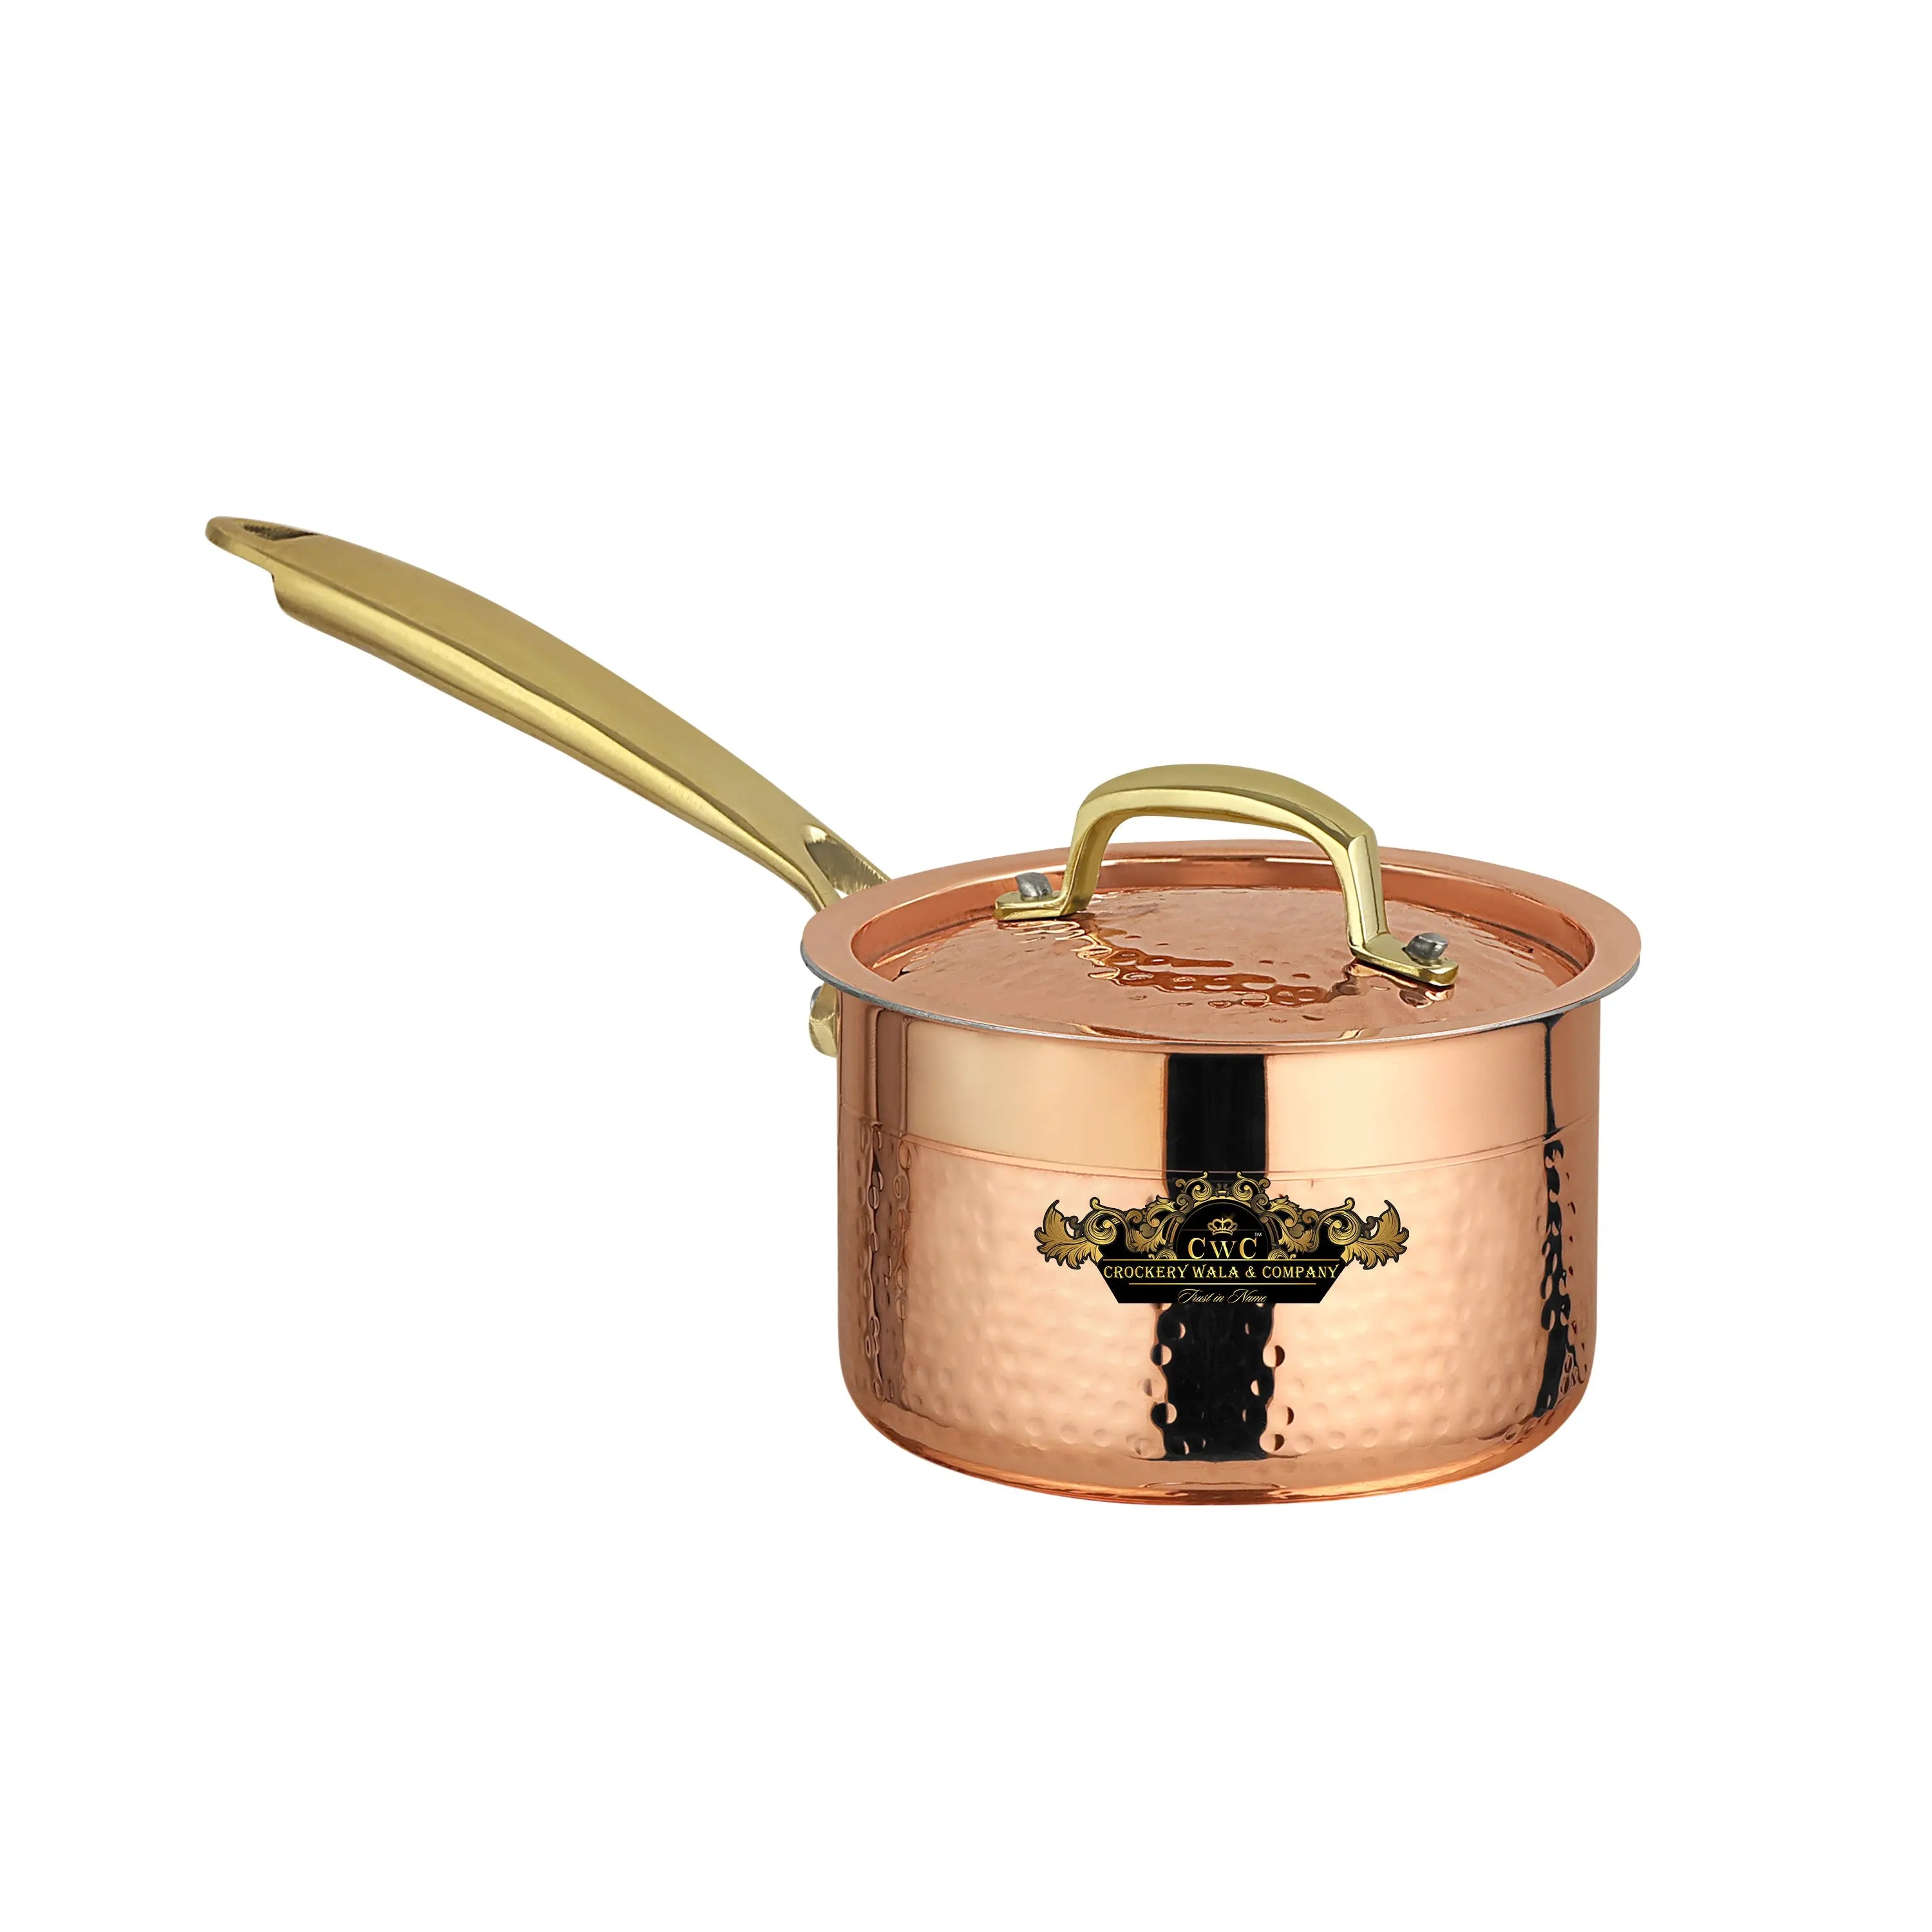 Pure copper sauce pan with kalai and lid hammered finish premium look CROCKERY WALA AND COMPANY